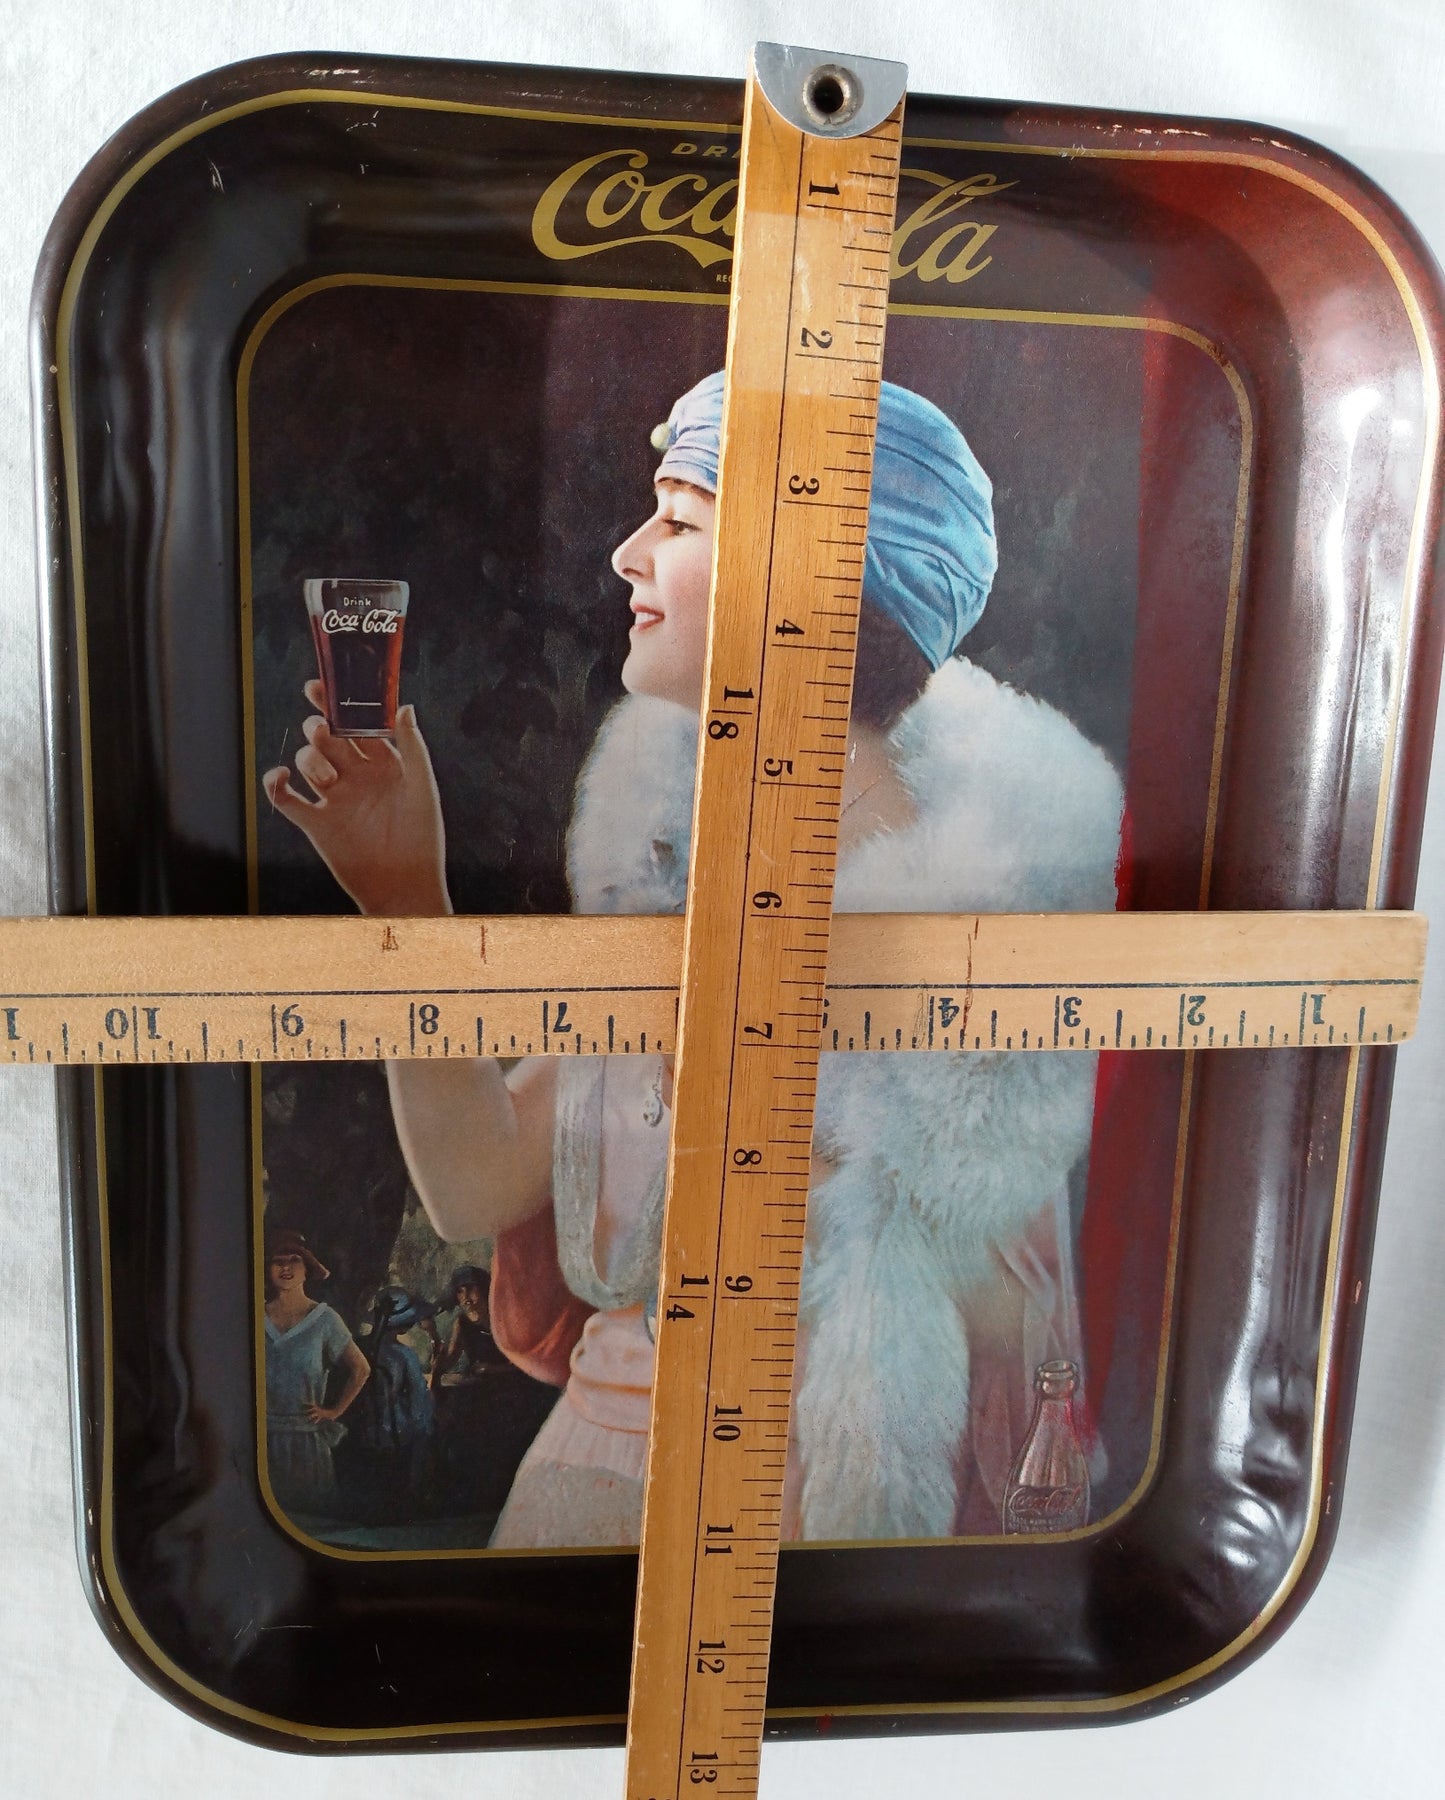 Vintage 1973 Coca Cola Party Girl Flapper Lithograph Metal Serving Tray Reproduction 1925 Coke Advertising Collectible Tray